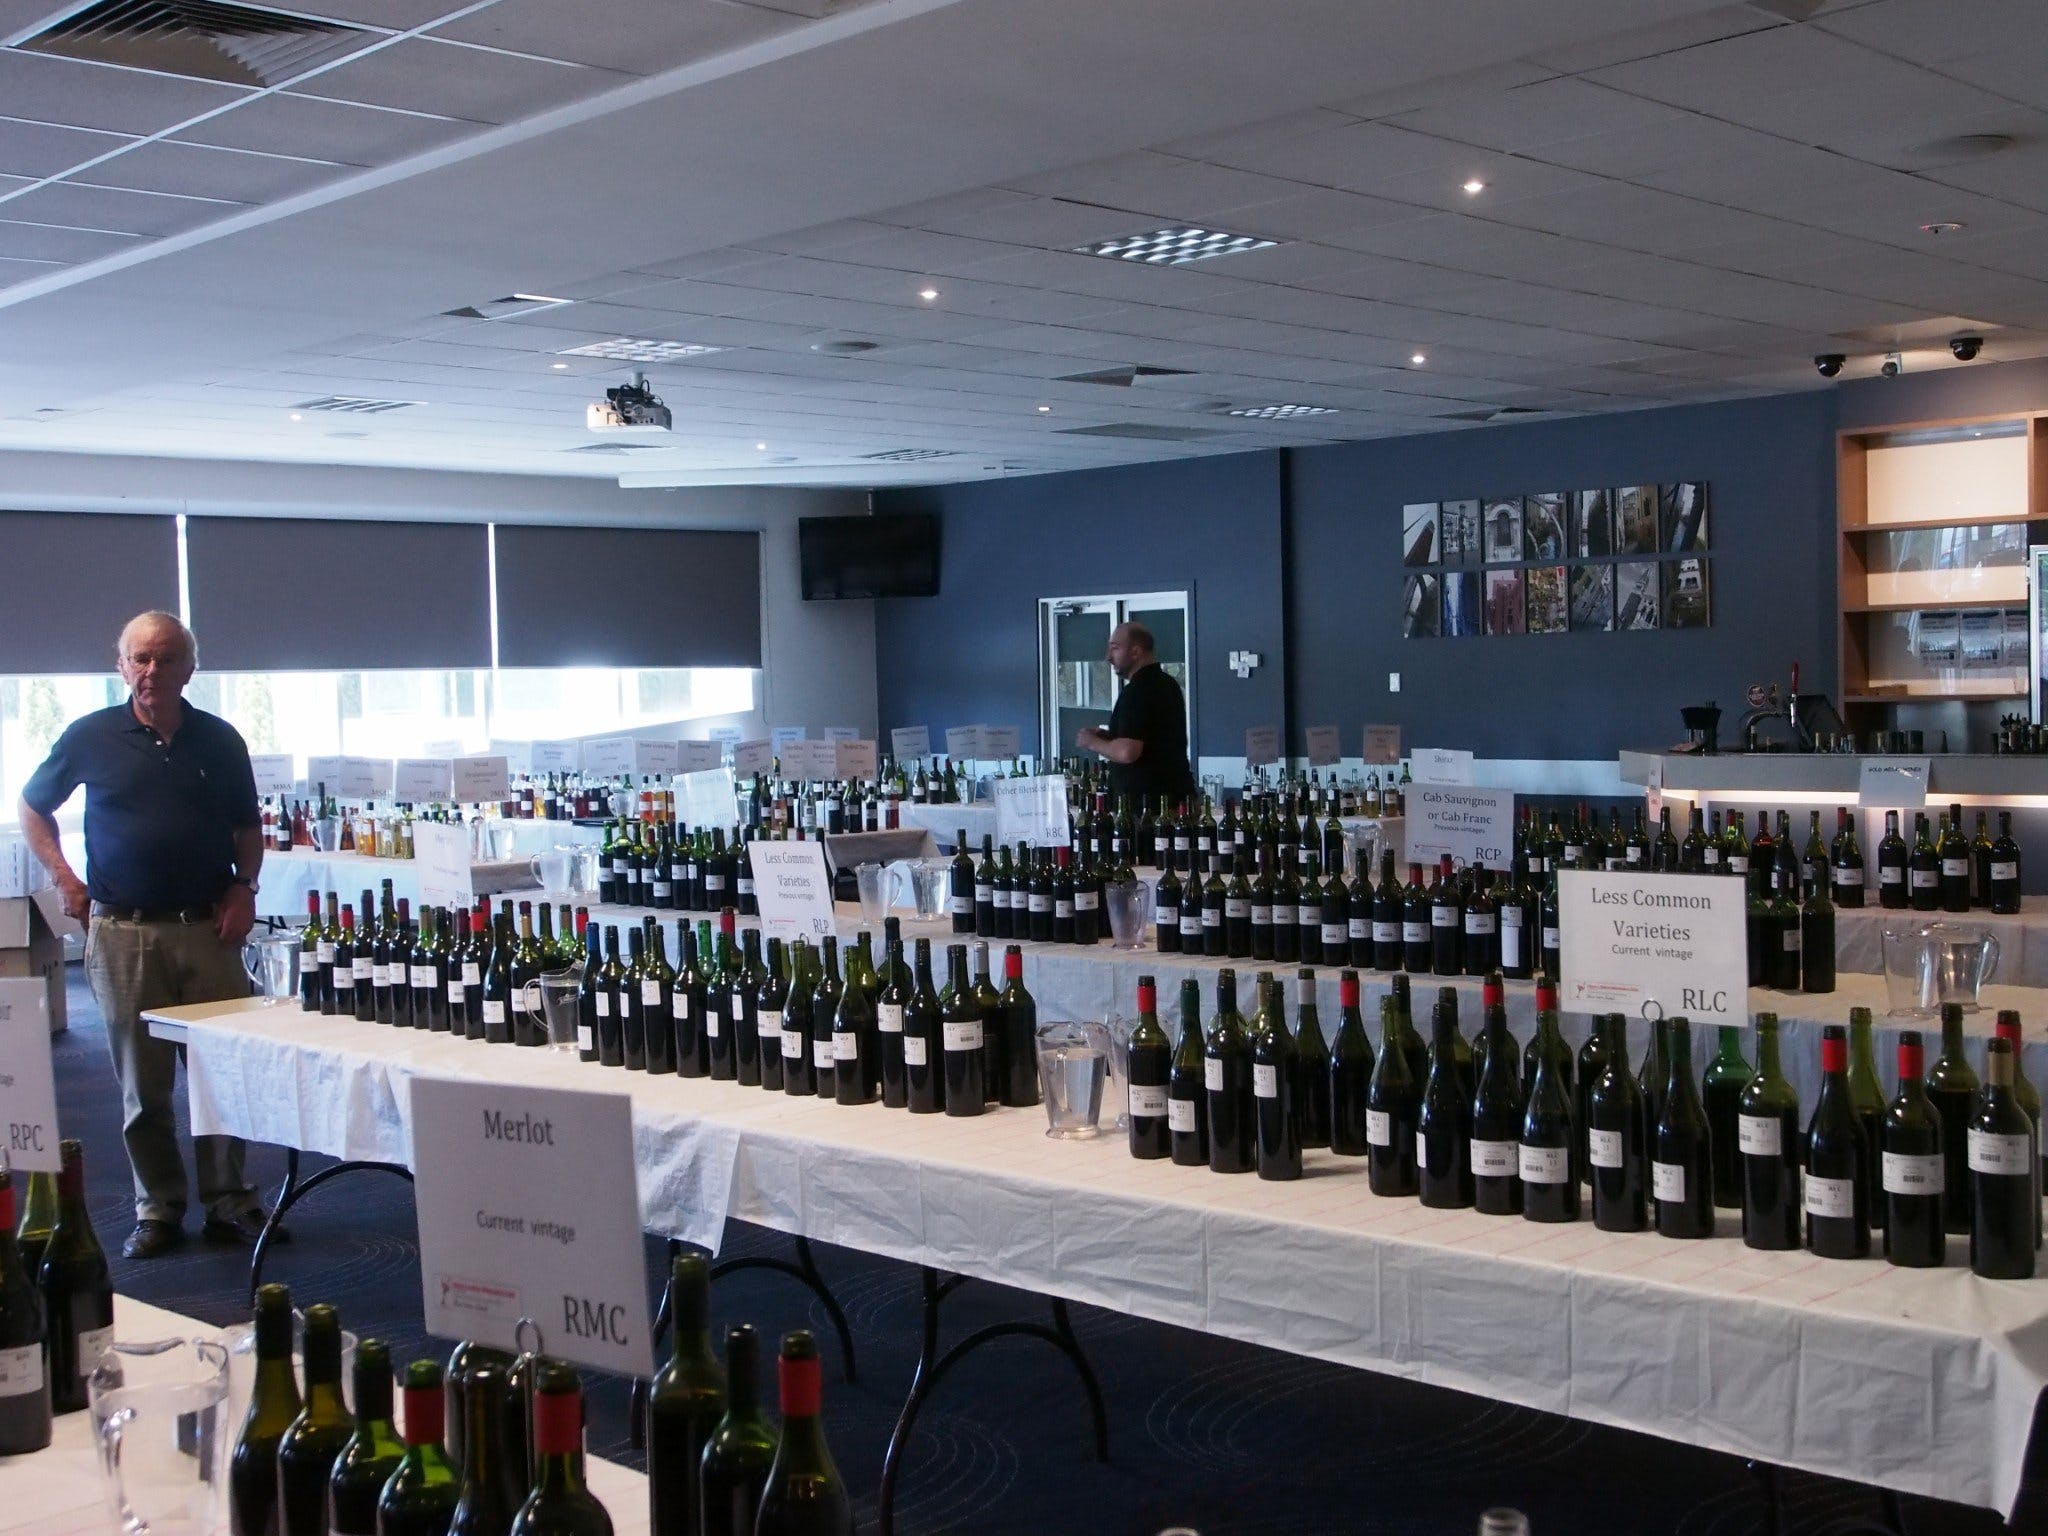 Eltham and District Wine Guild Annual Wine Show - 51st Annual Show - Accommodation Cooktown